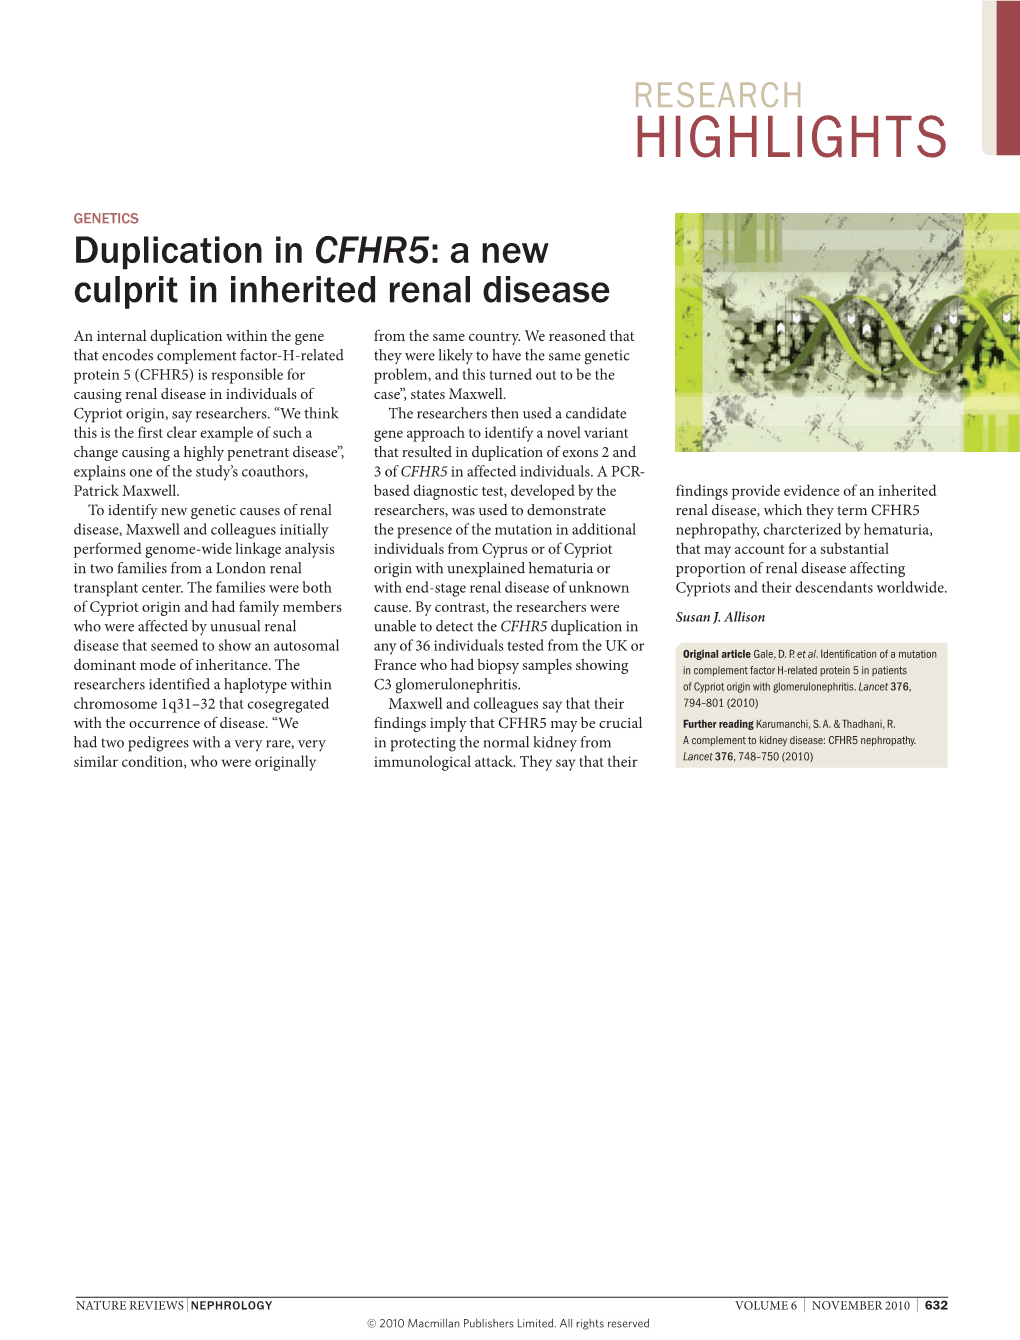 Duplication in CFHR5: a New Culprit in Inherited Renal Disease an Internal Duplication Within the Gene from the Same Country